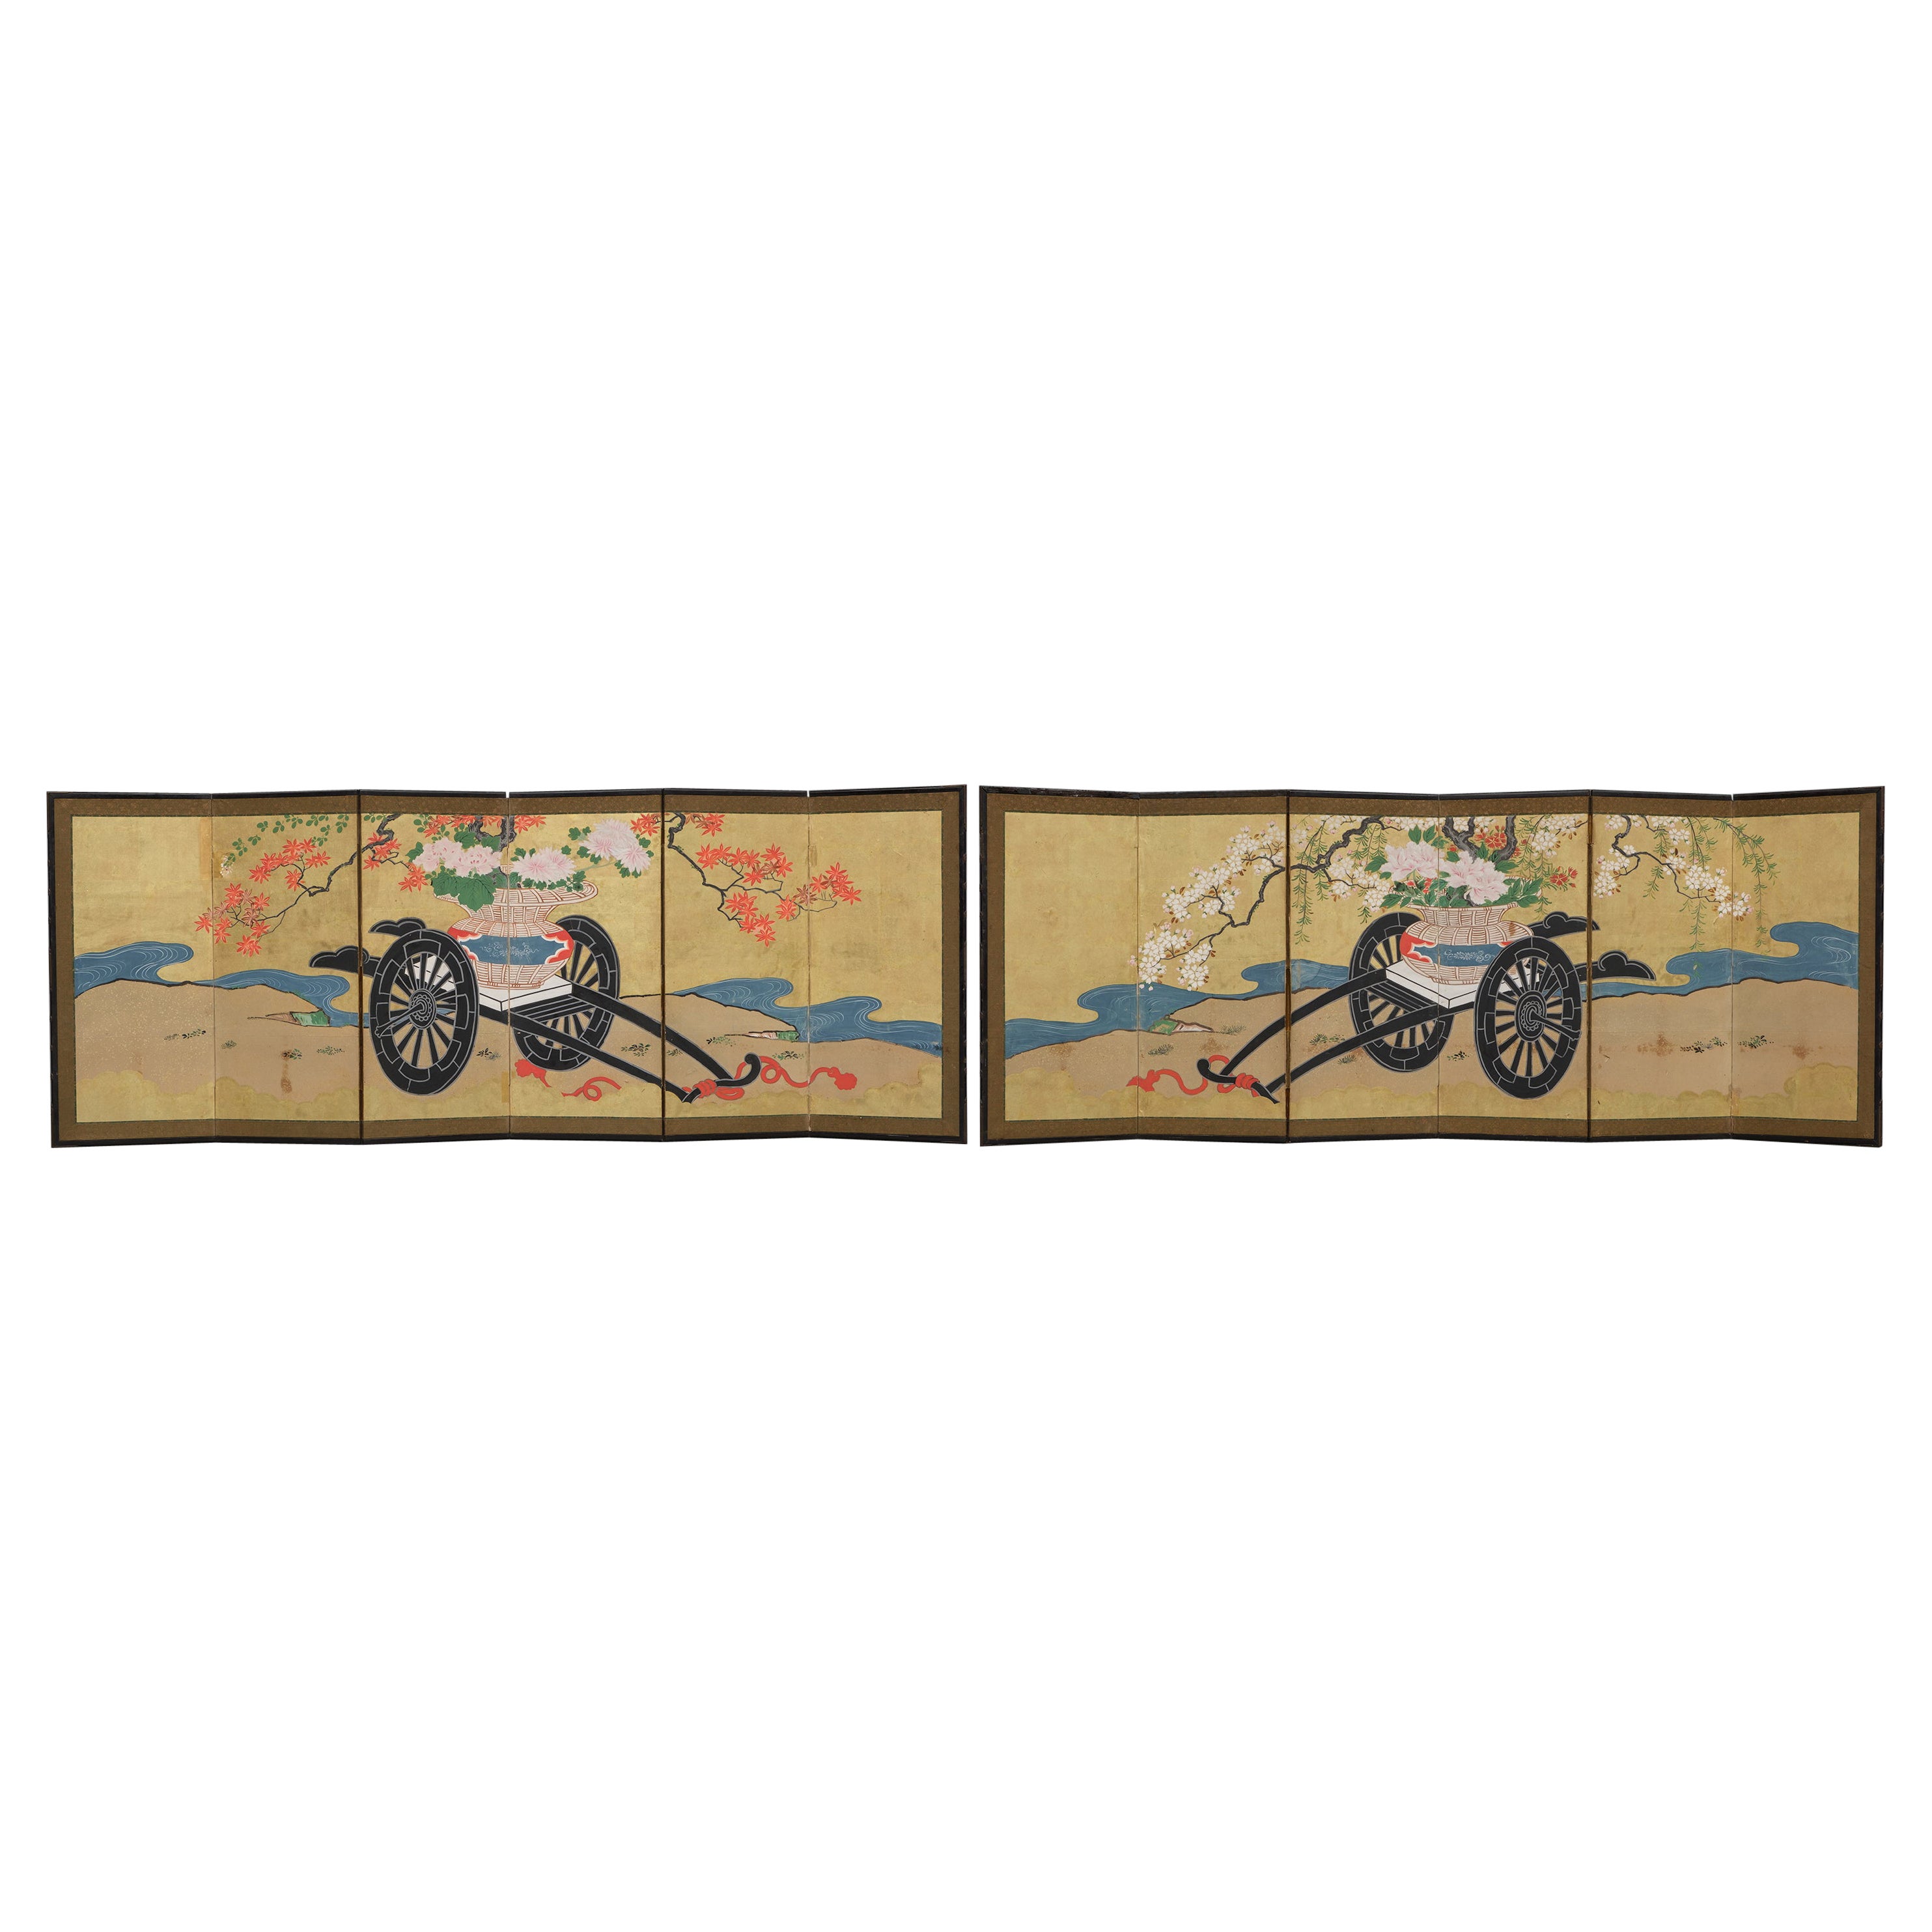 Pair of Japanese hinagata byôbu 雛形屏風 (small folding screens) with flower carts For Sale